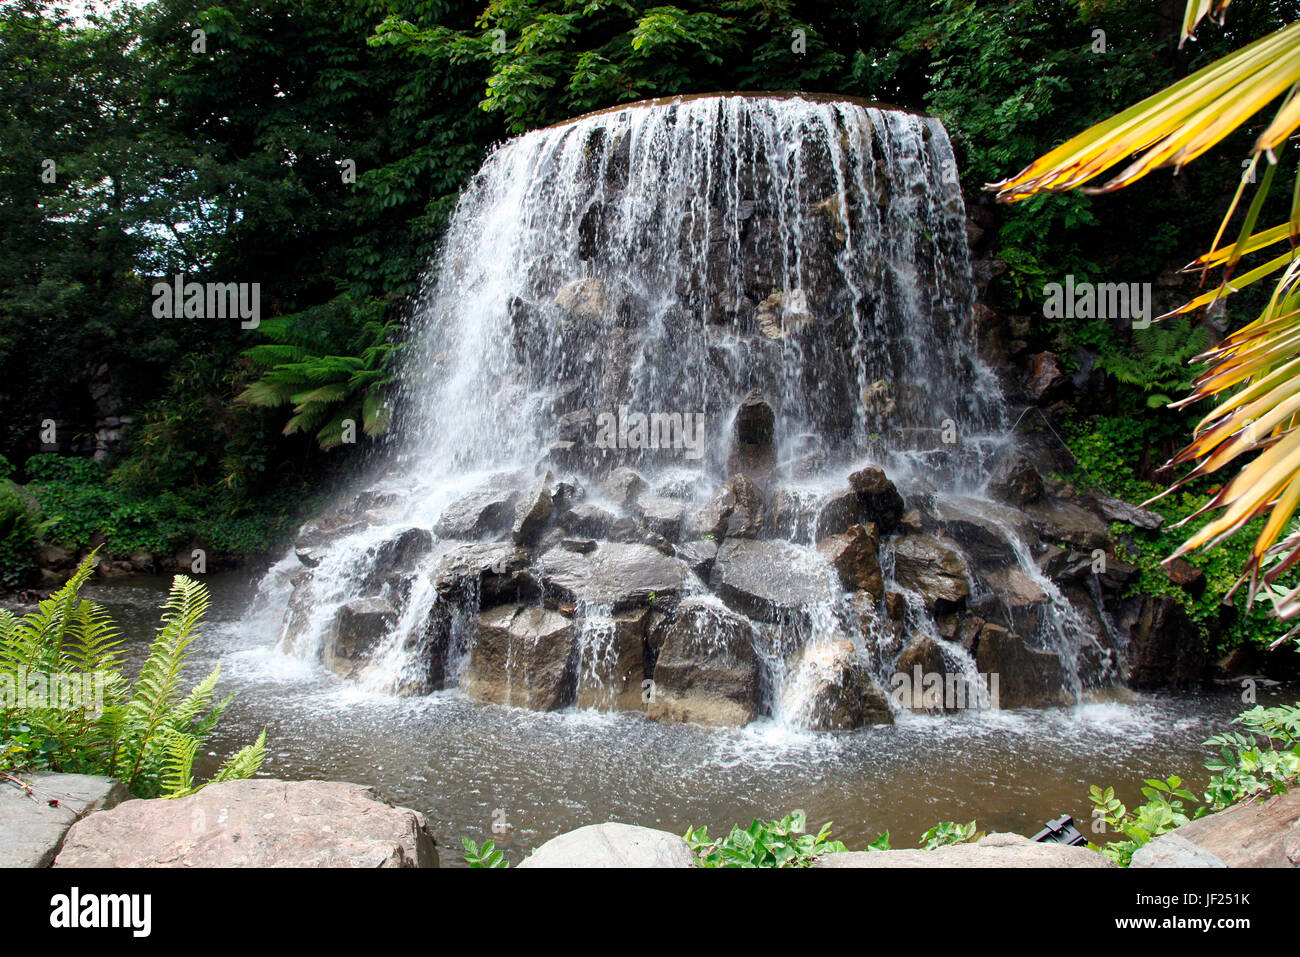 The Waterfall in Iveagh Gardens, public park gifted to the nation by Lord Iveagh in Dublin, Ireland Stock Photo